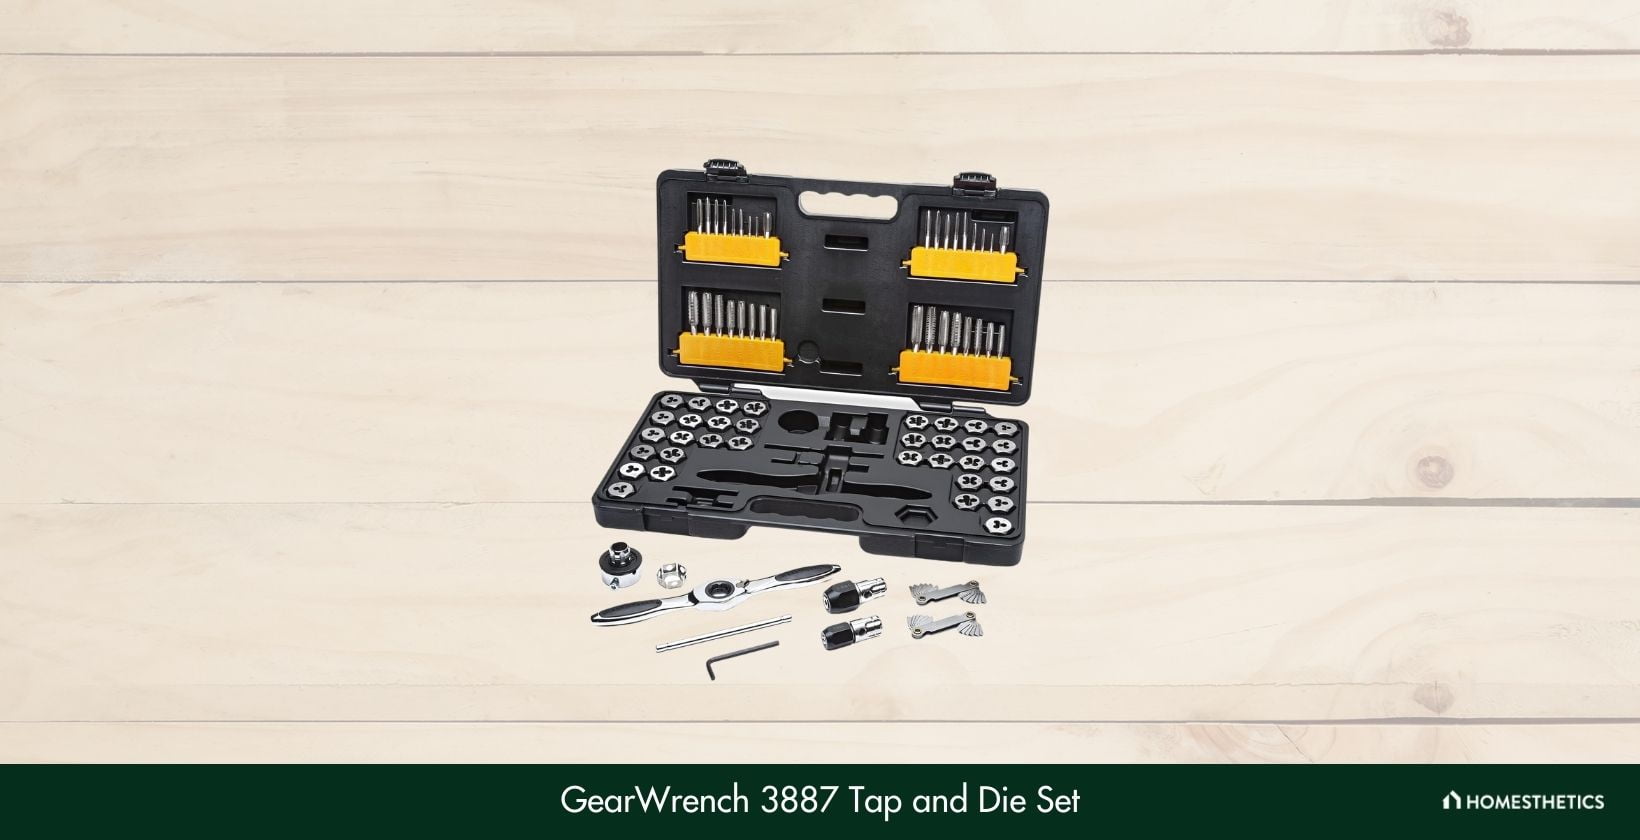 GearWrench 3887 Tap and Die Set